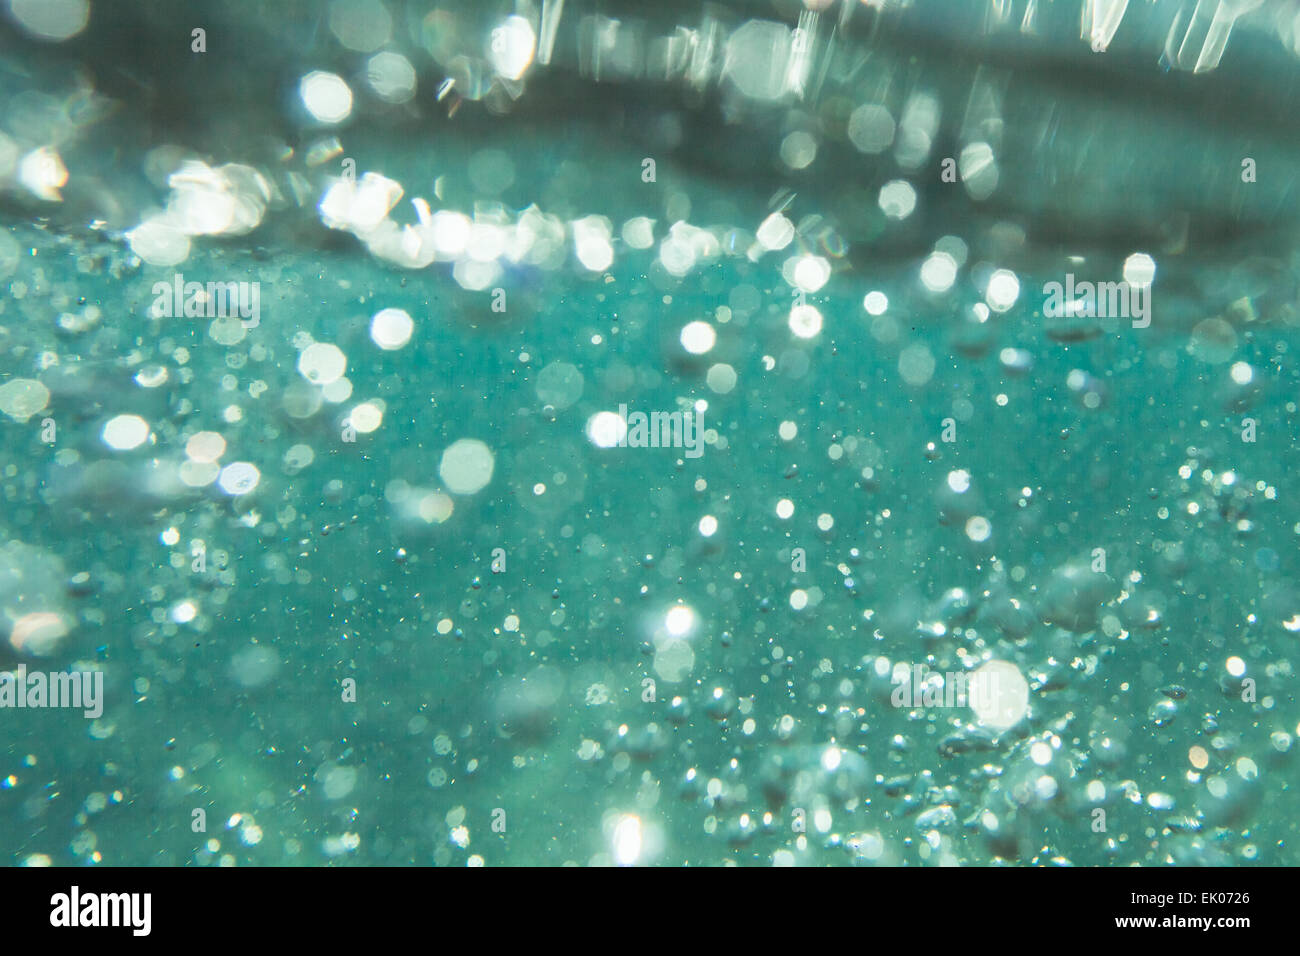 Abstract Underwater Bokeh And Bubbles Background Stock Photo Alamy